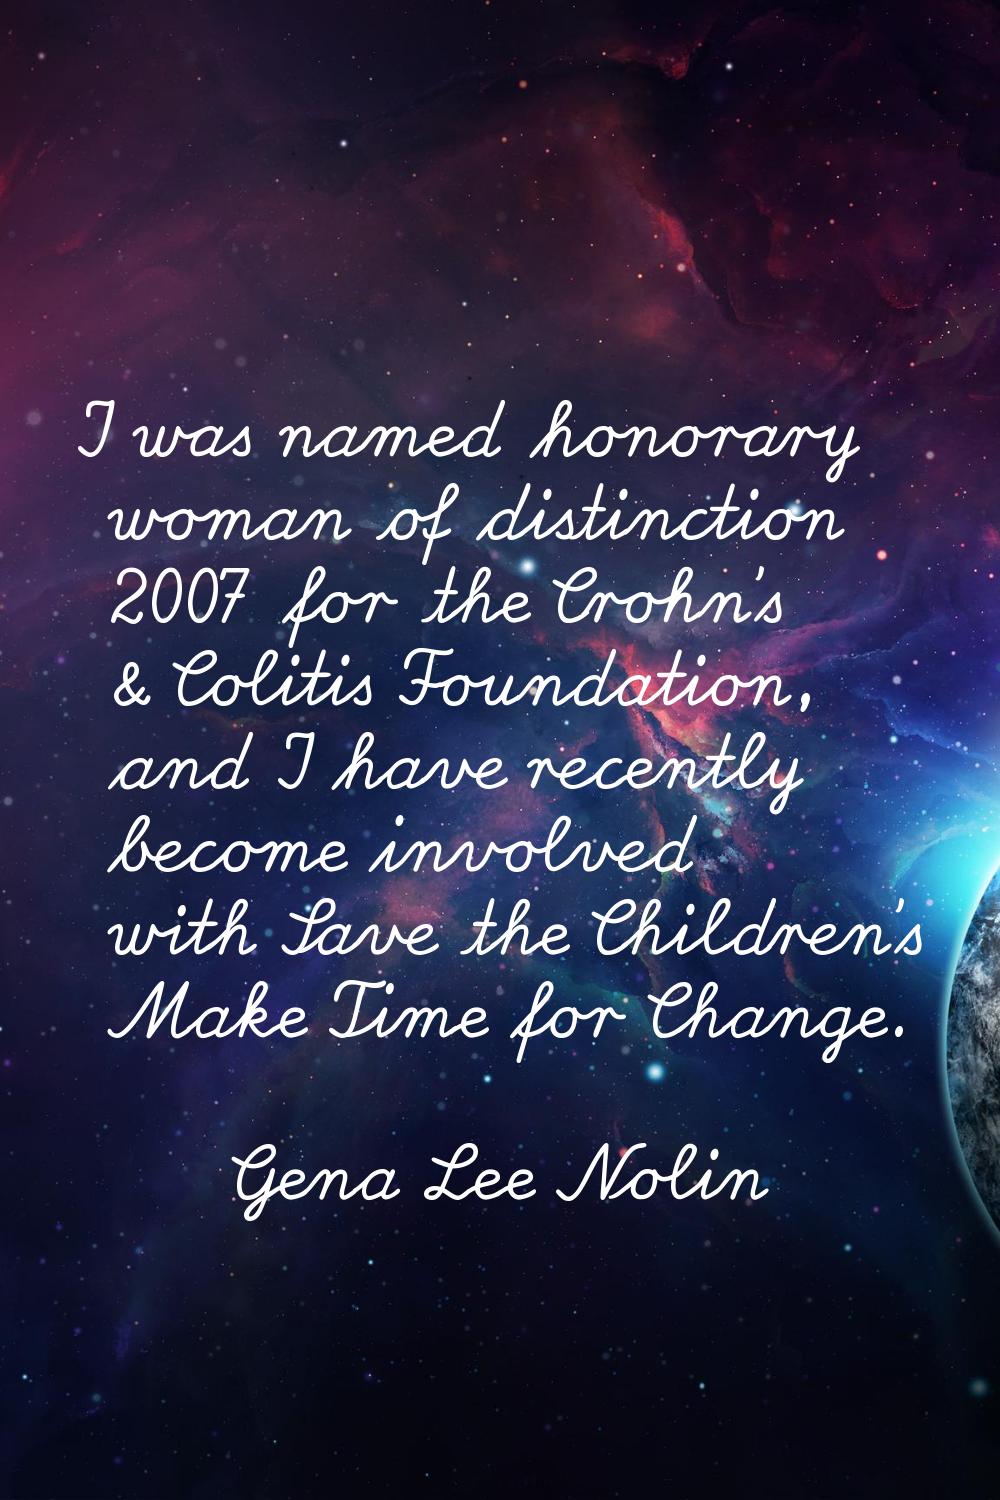 I was named honorary woman of distinction 2007 for the Crohn's & Colitis Foundation, and I have rec